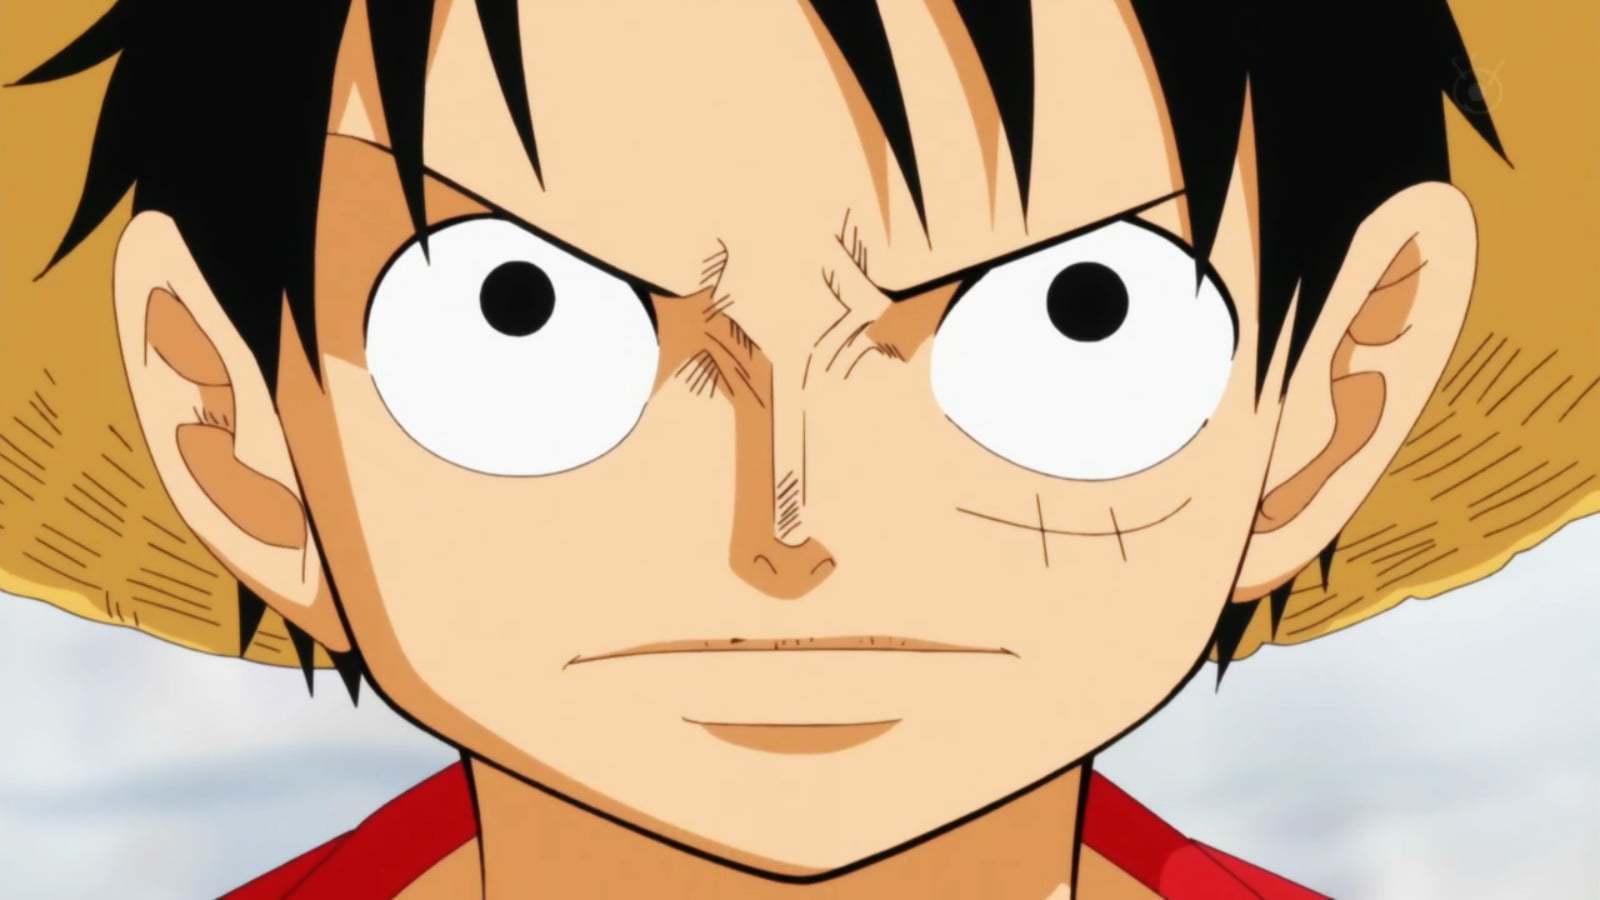 Onepiece Monkey D. Luffy, Anime, One Piece, art and craft, sky